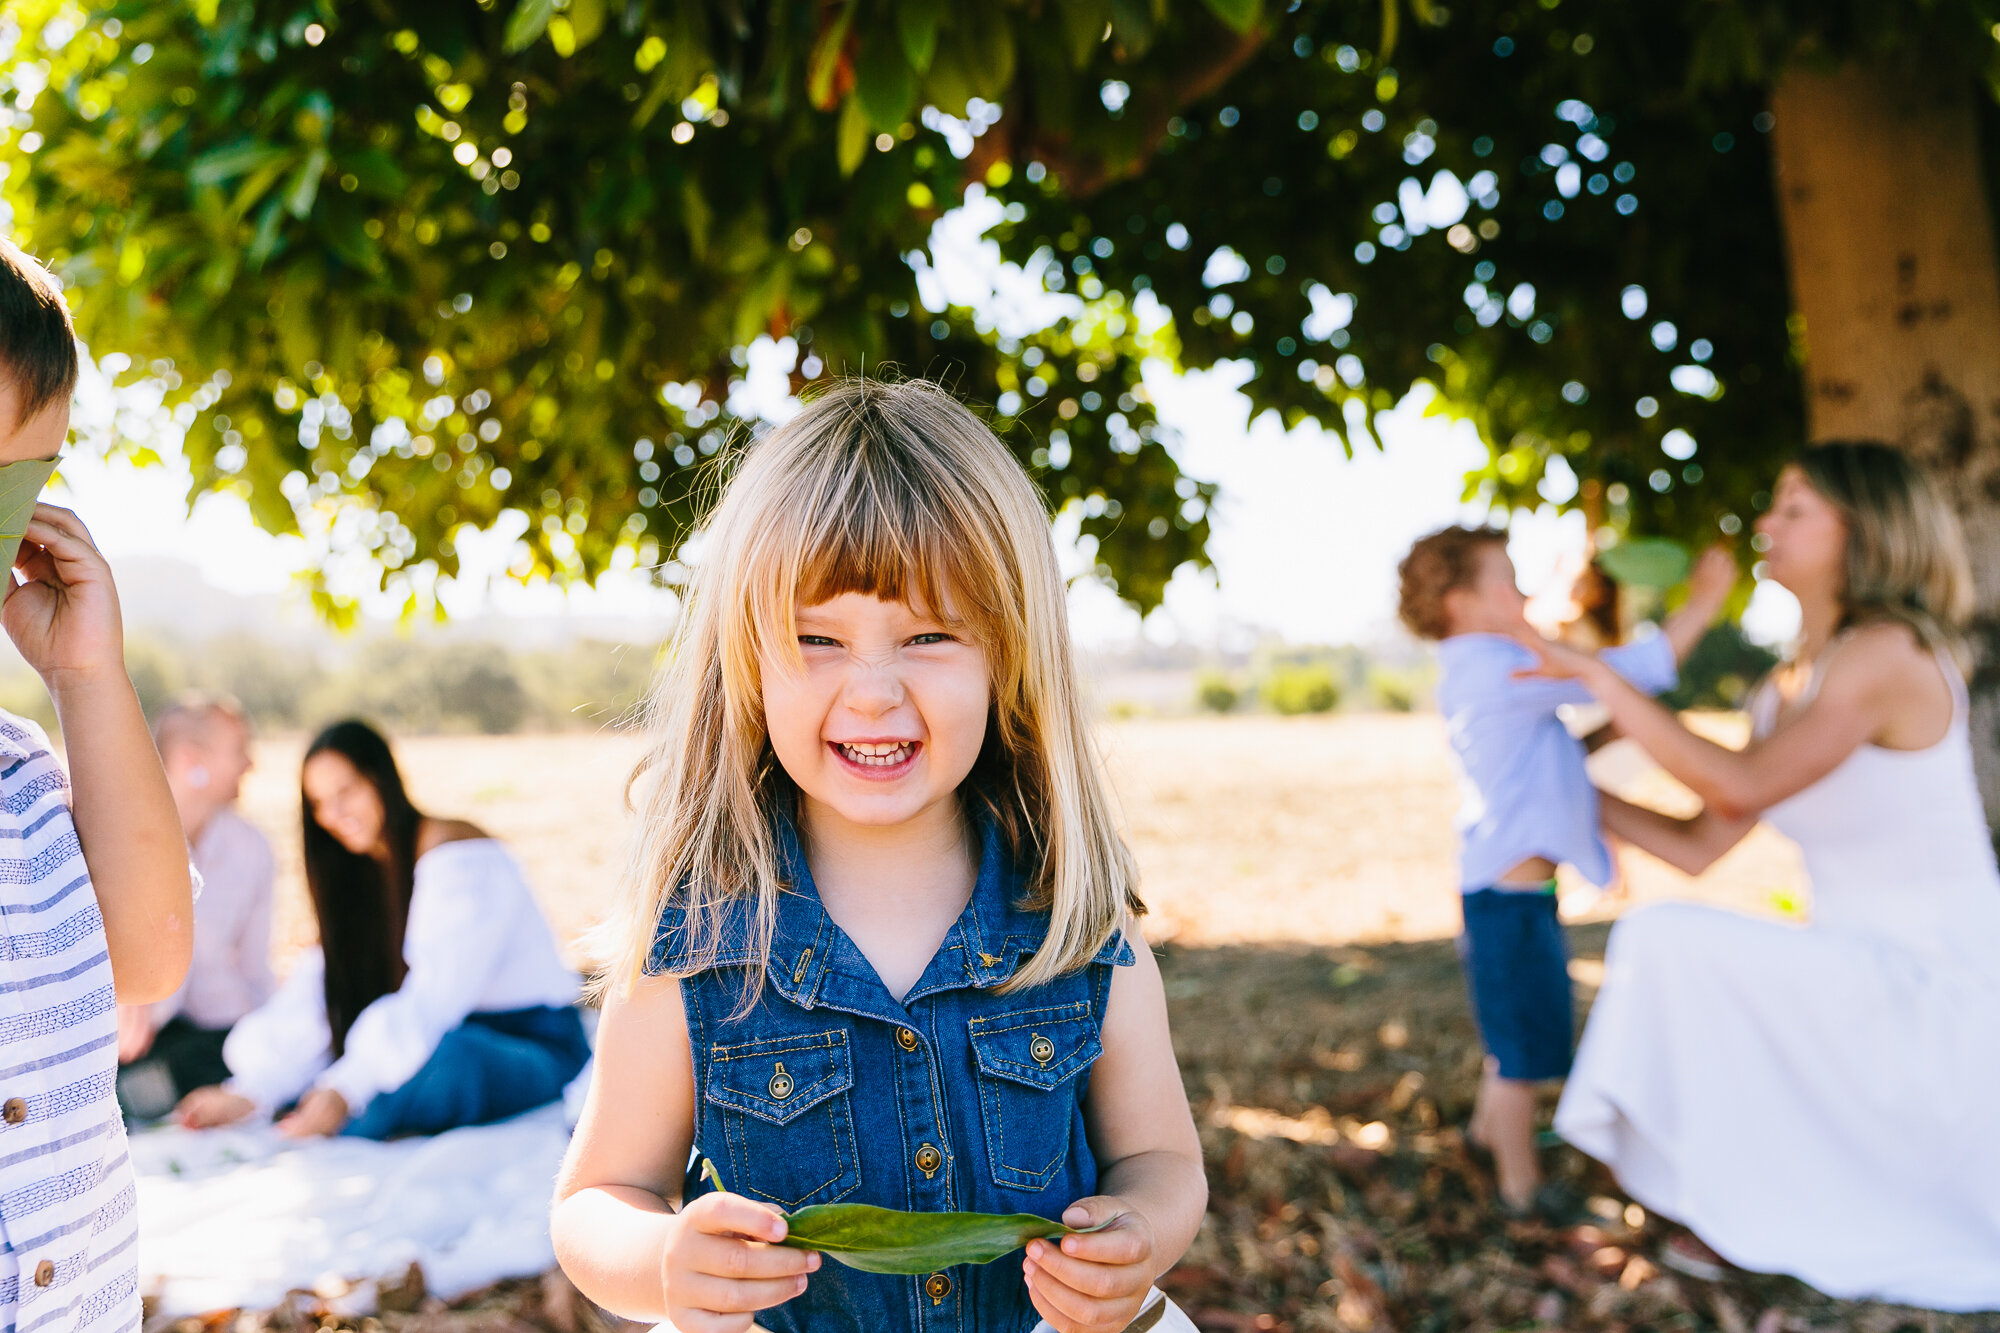 Los_Angeles_Family_Photography_Orange_County_Children_Babies_Field_Farm_Outdoors_Morning_Session_California_Girls_Boys_Kids_Photography-1264.jpg